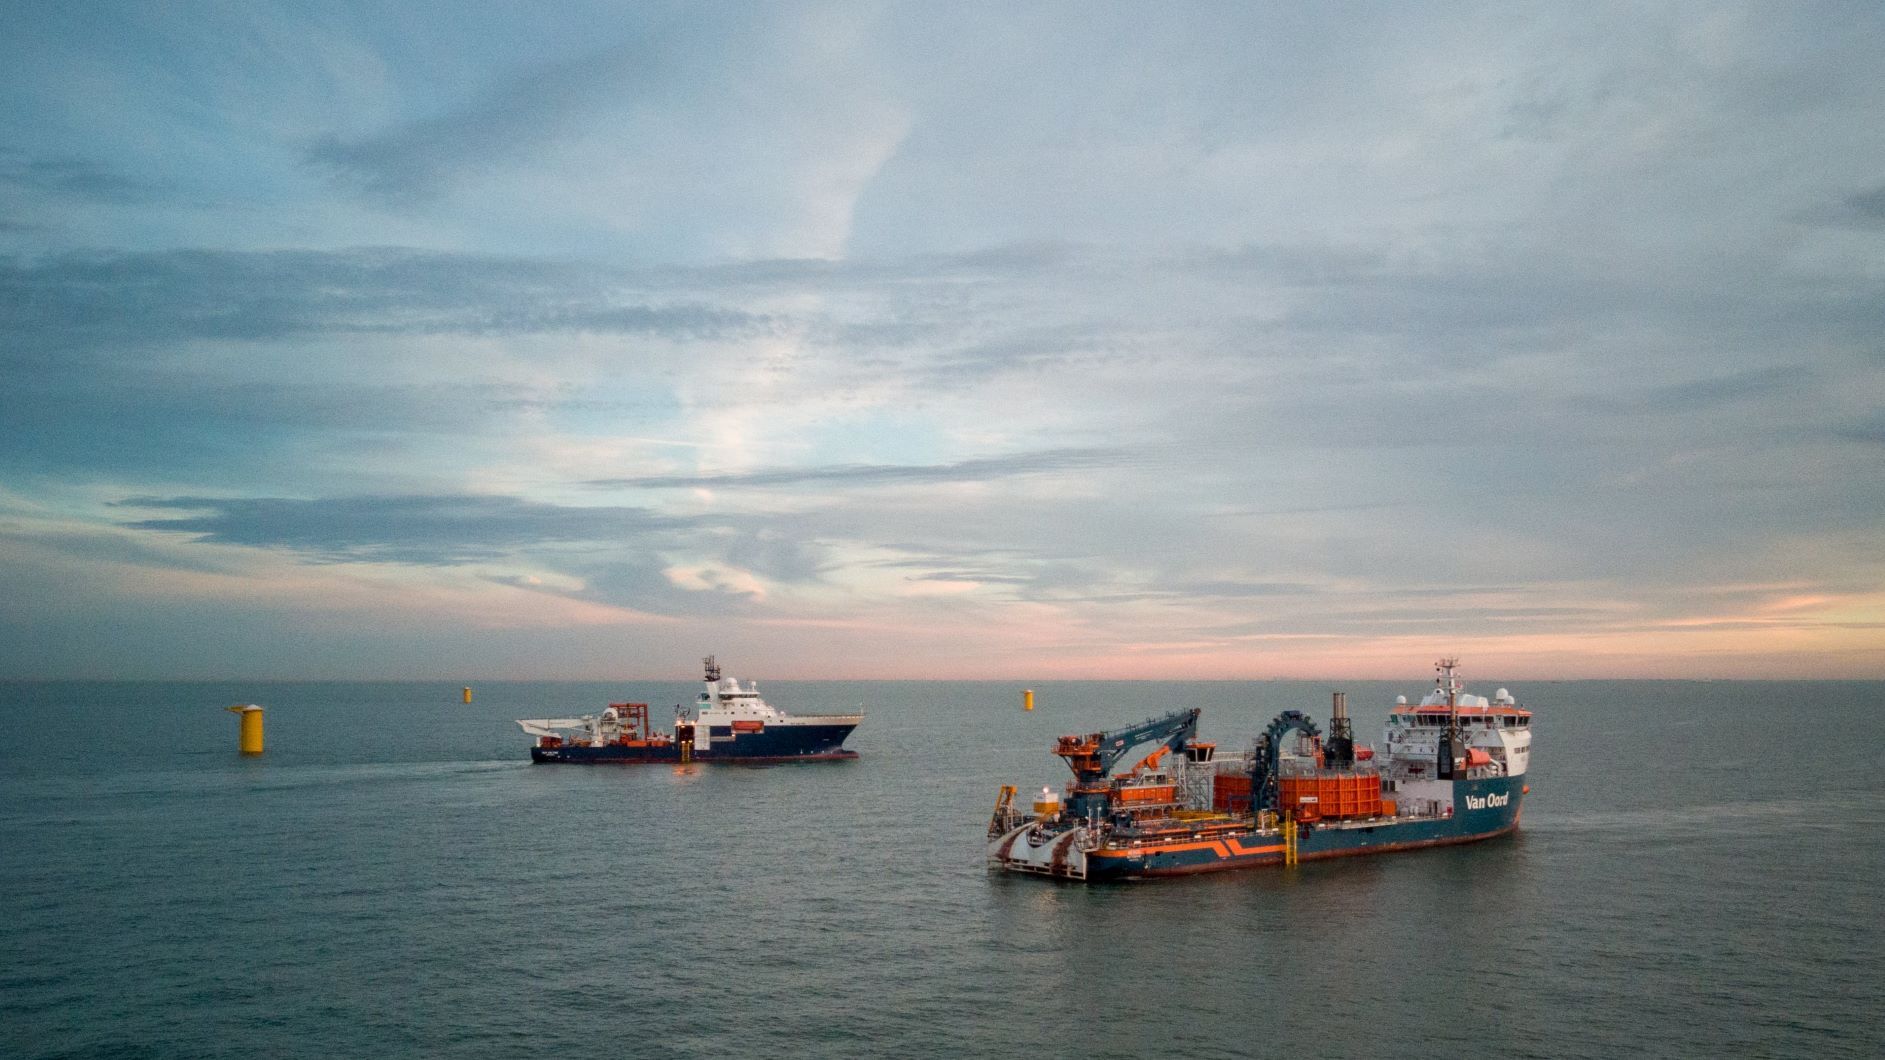 Van Oord Nexus cable laying vessel from Norther wind farm offshore high voltage substation